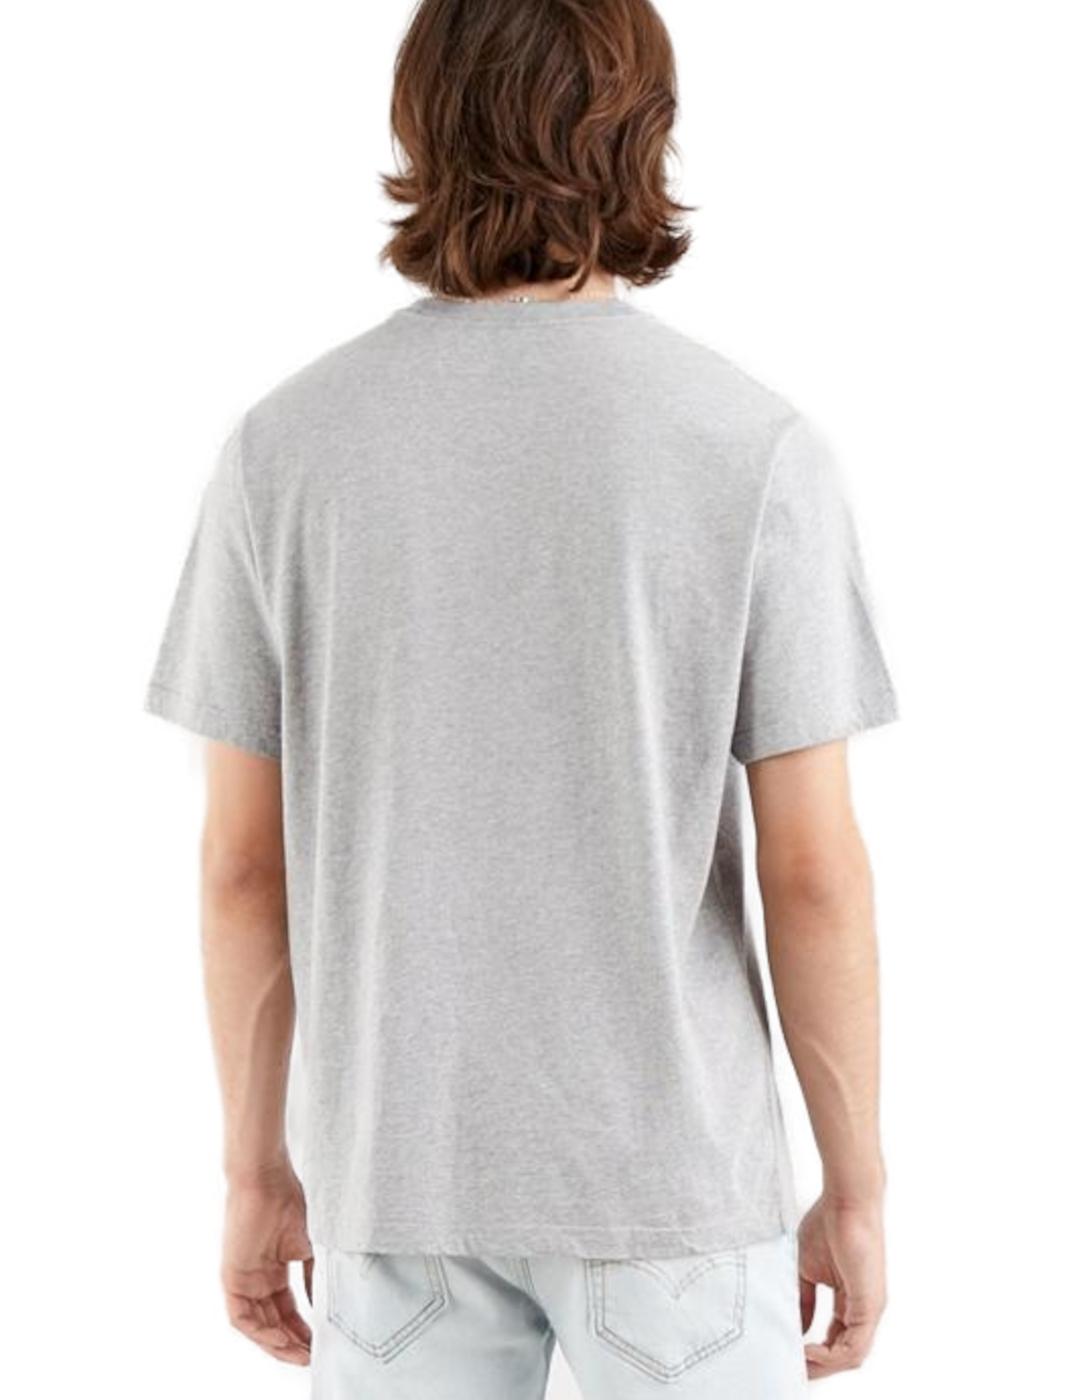 Camiseta levi´s relaxed fit tee ssnl gris manga corta hombre